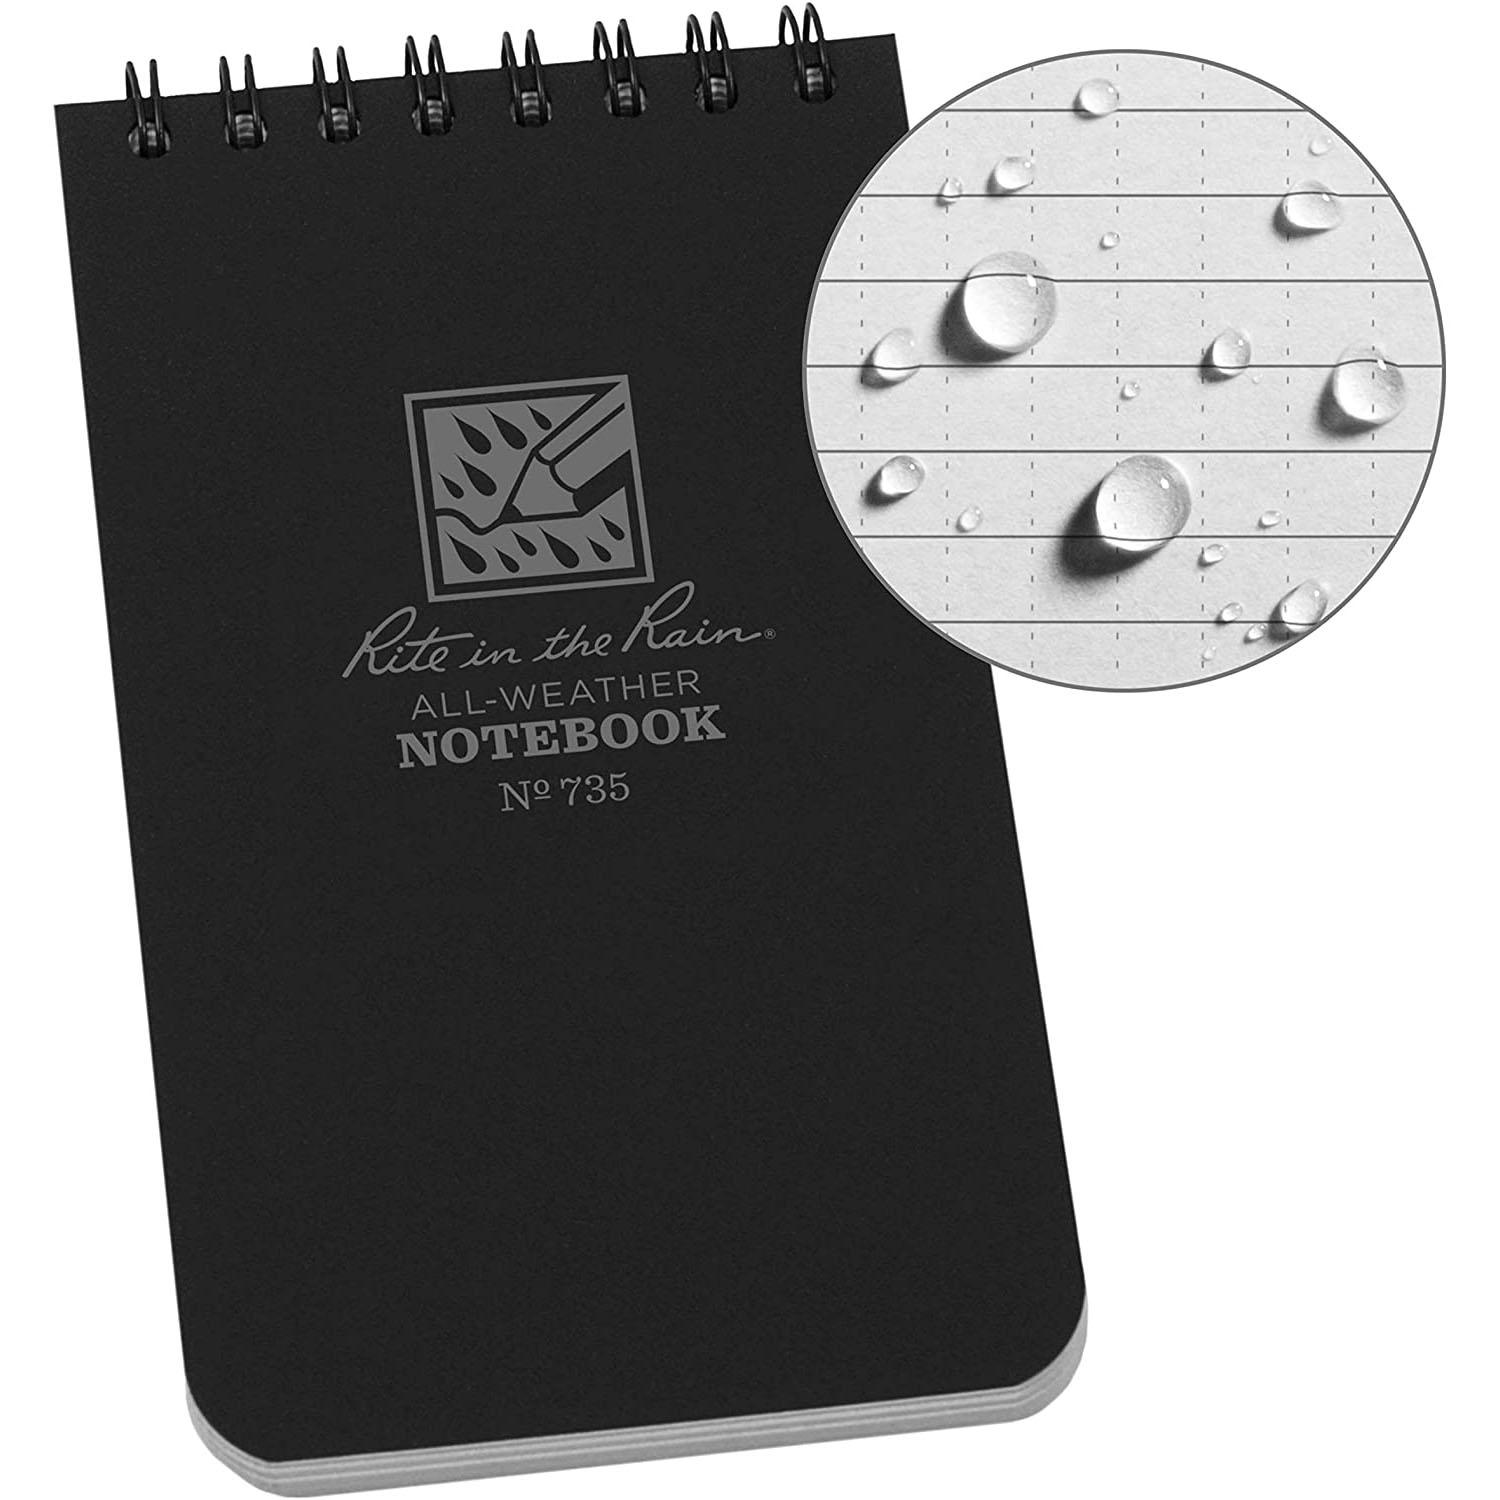 Rite in the Rain 3x5 Weatherproof Top-Spiral Notebook for $3.69